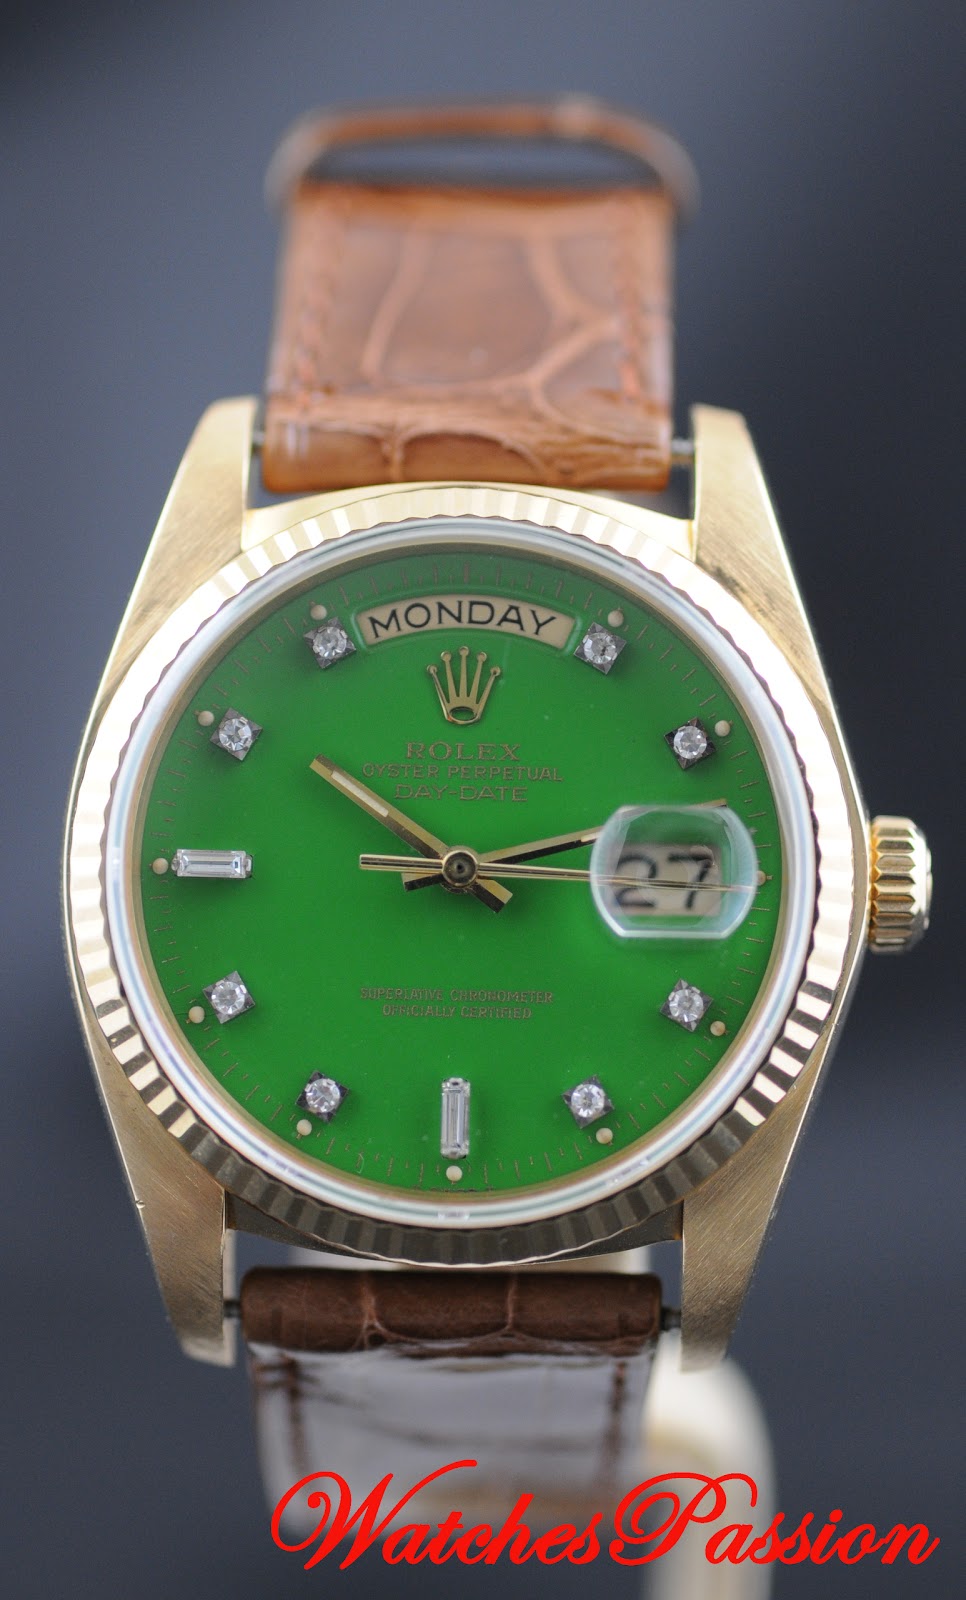 Watches Passion: Rolex DayDate Green Enamel with Diamonds